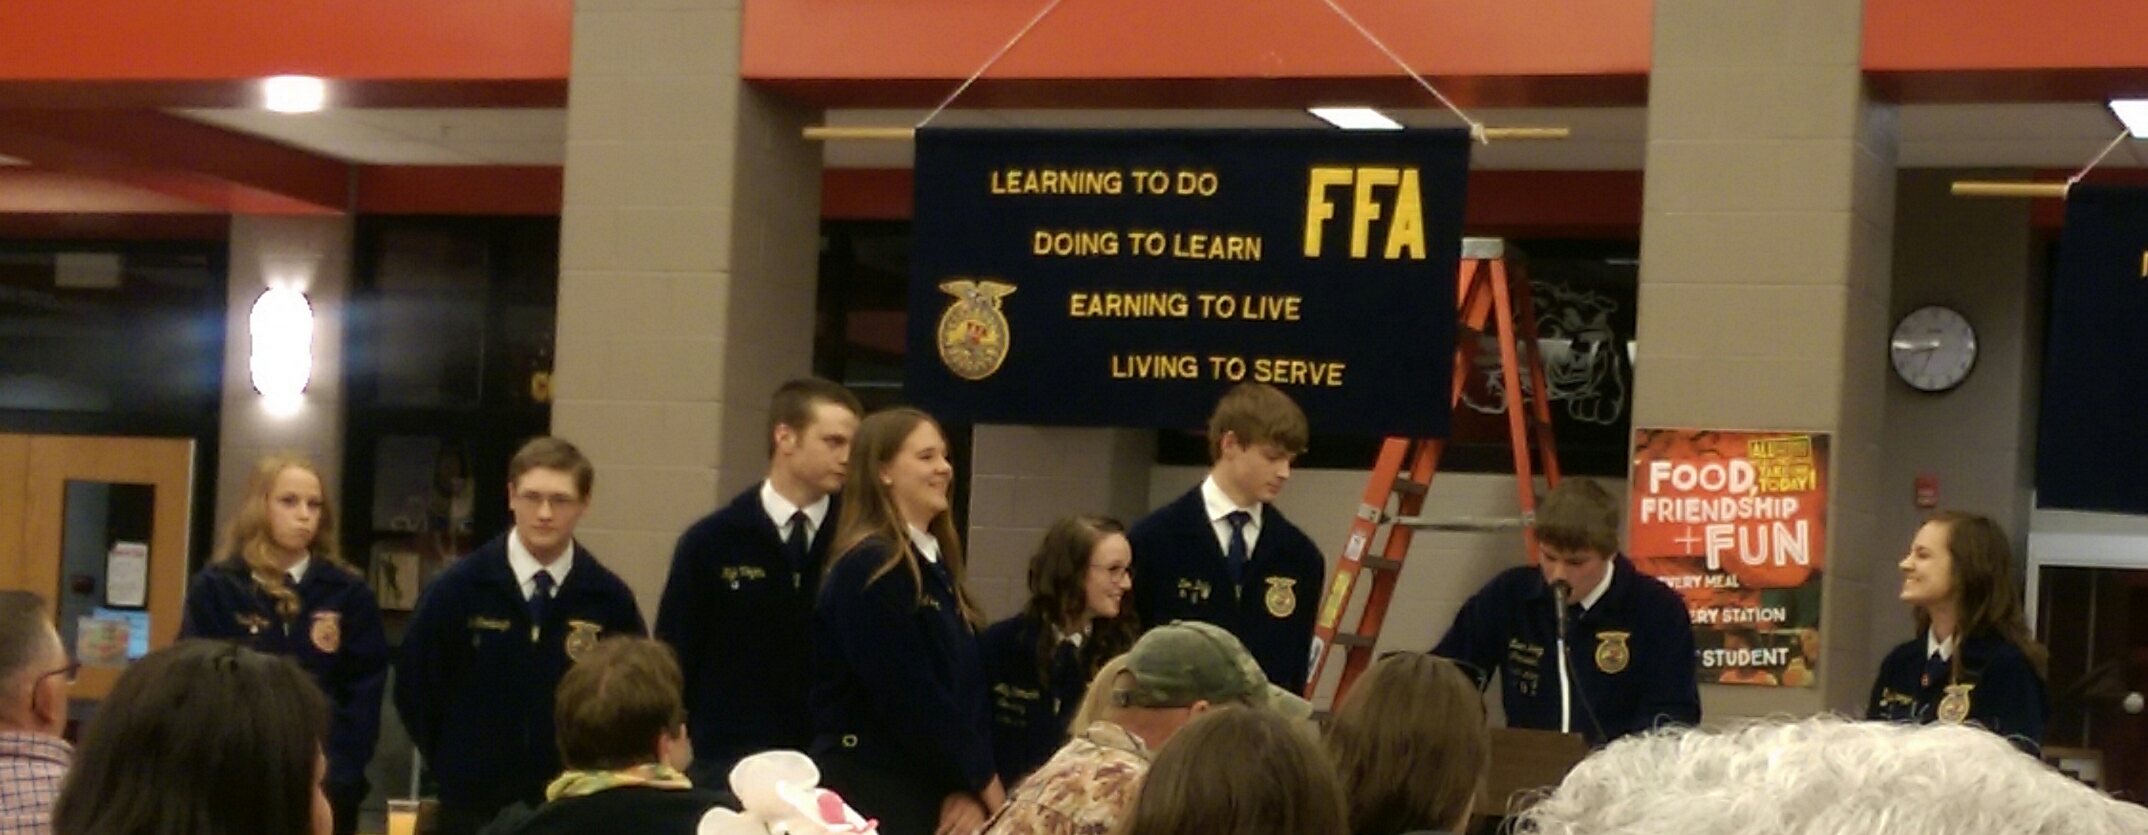 Evan Young President of the 2015/2016 FFA Officers, installing the 2016/2017 FFA Officers